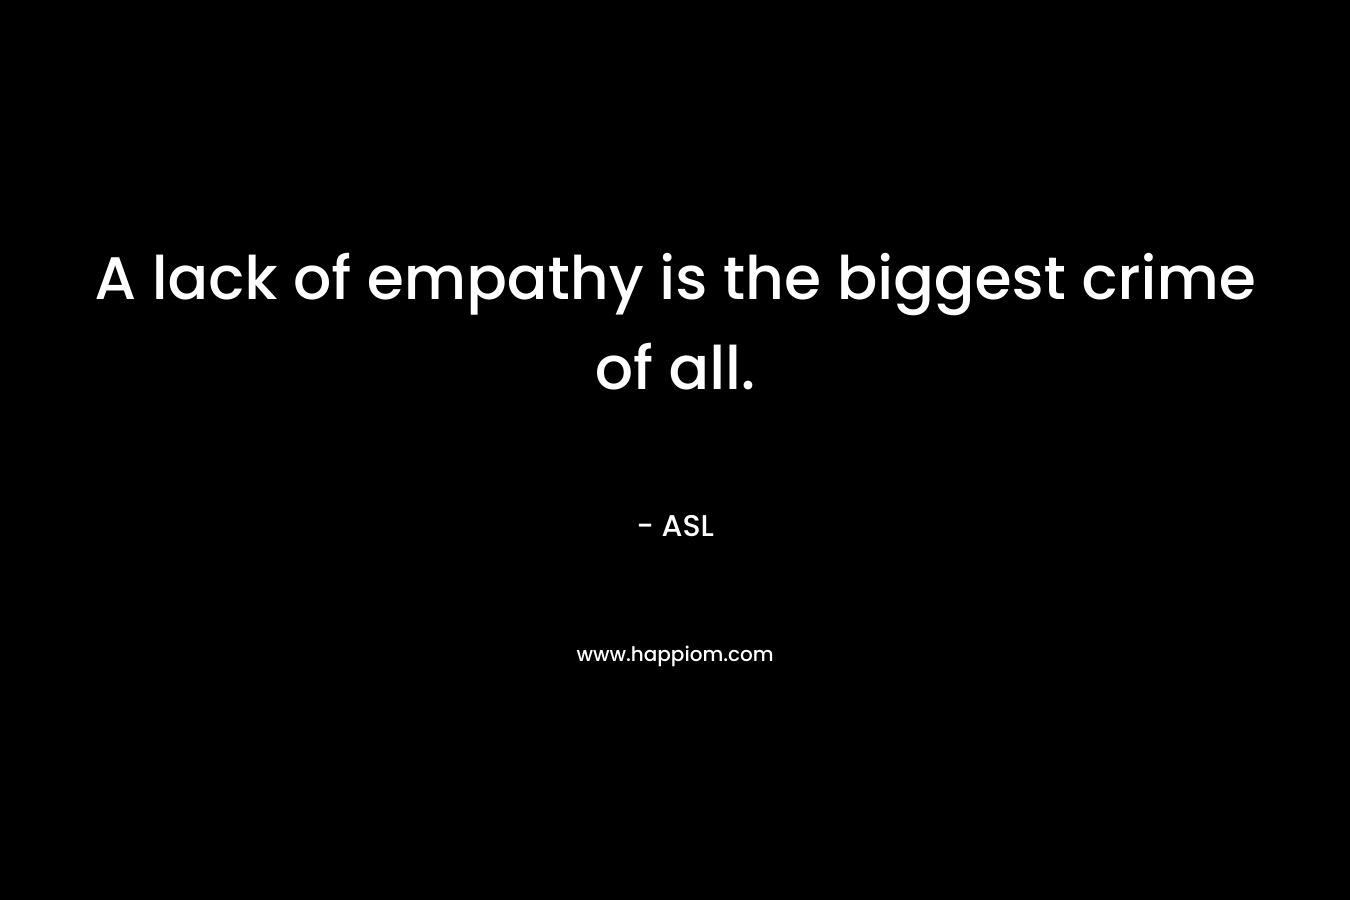 A lack of empathy is the biggest crime of all.